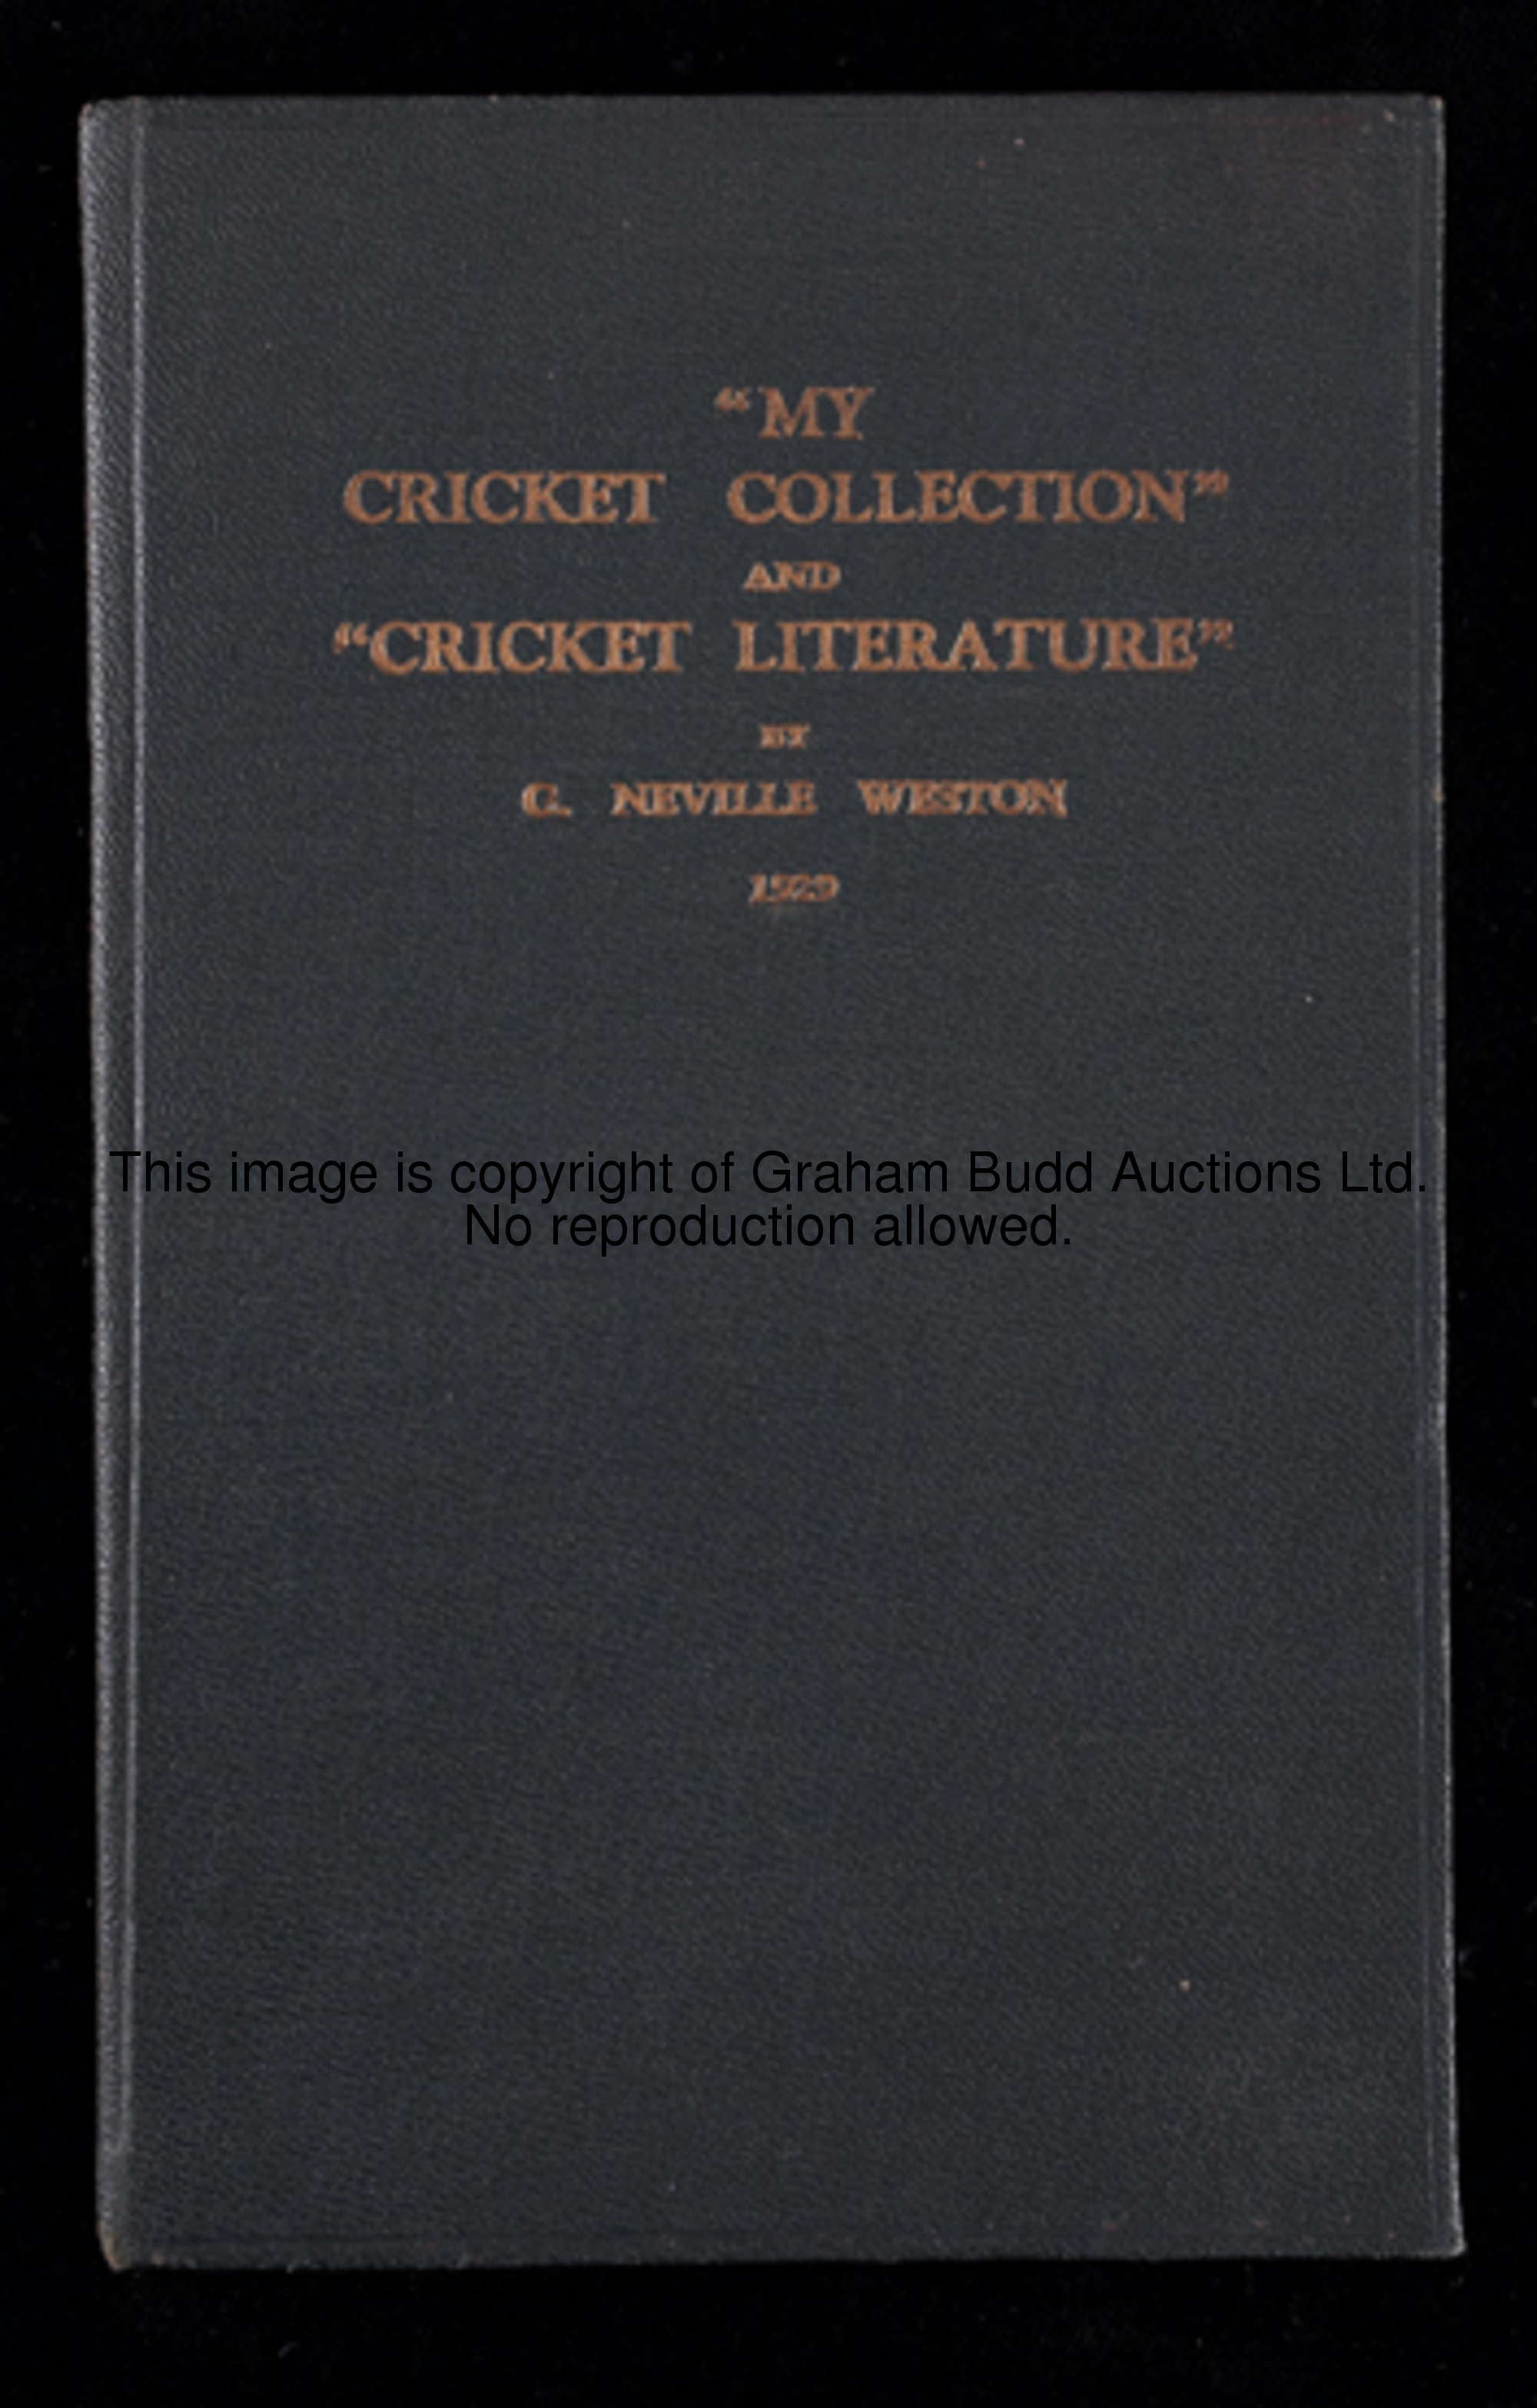 Weston (G. Neville) My Cricket Collection, rare, signed and numbered 16 from the 1st/2nd edition pri...